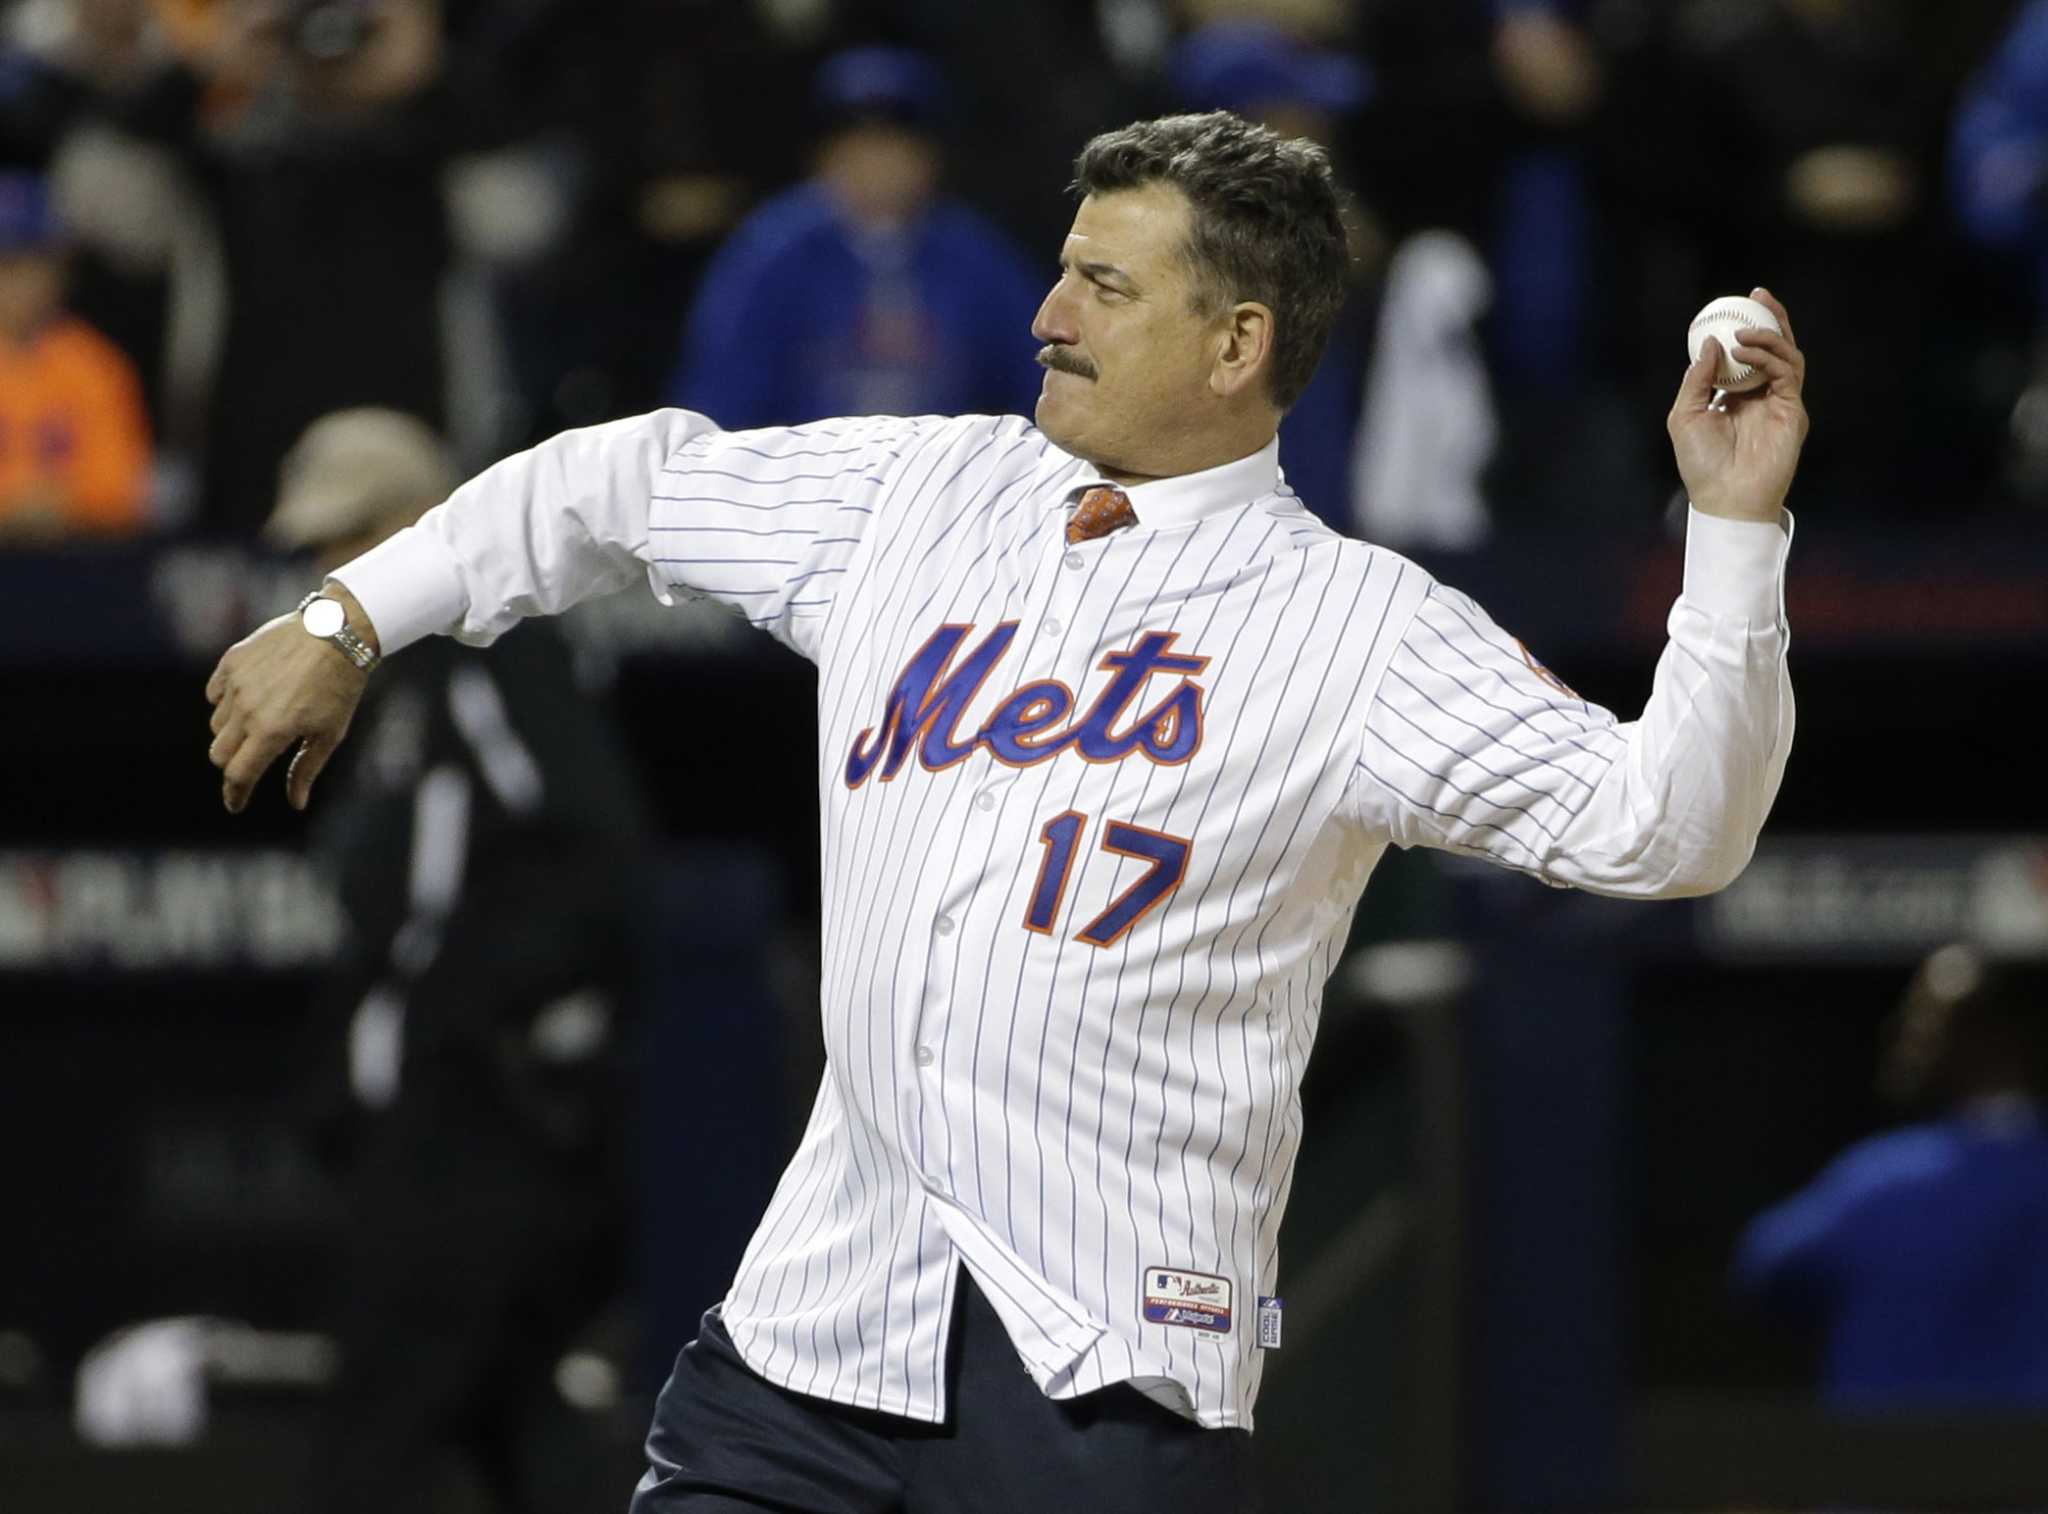 Keith Hernandez shouldn't be quiet on his own drug use – New York Daily News